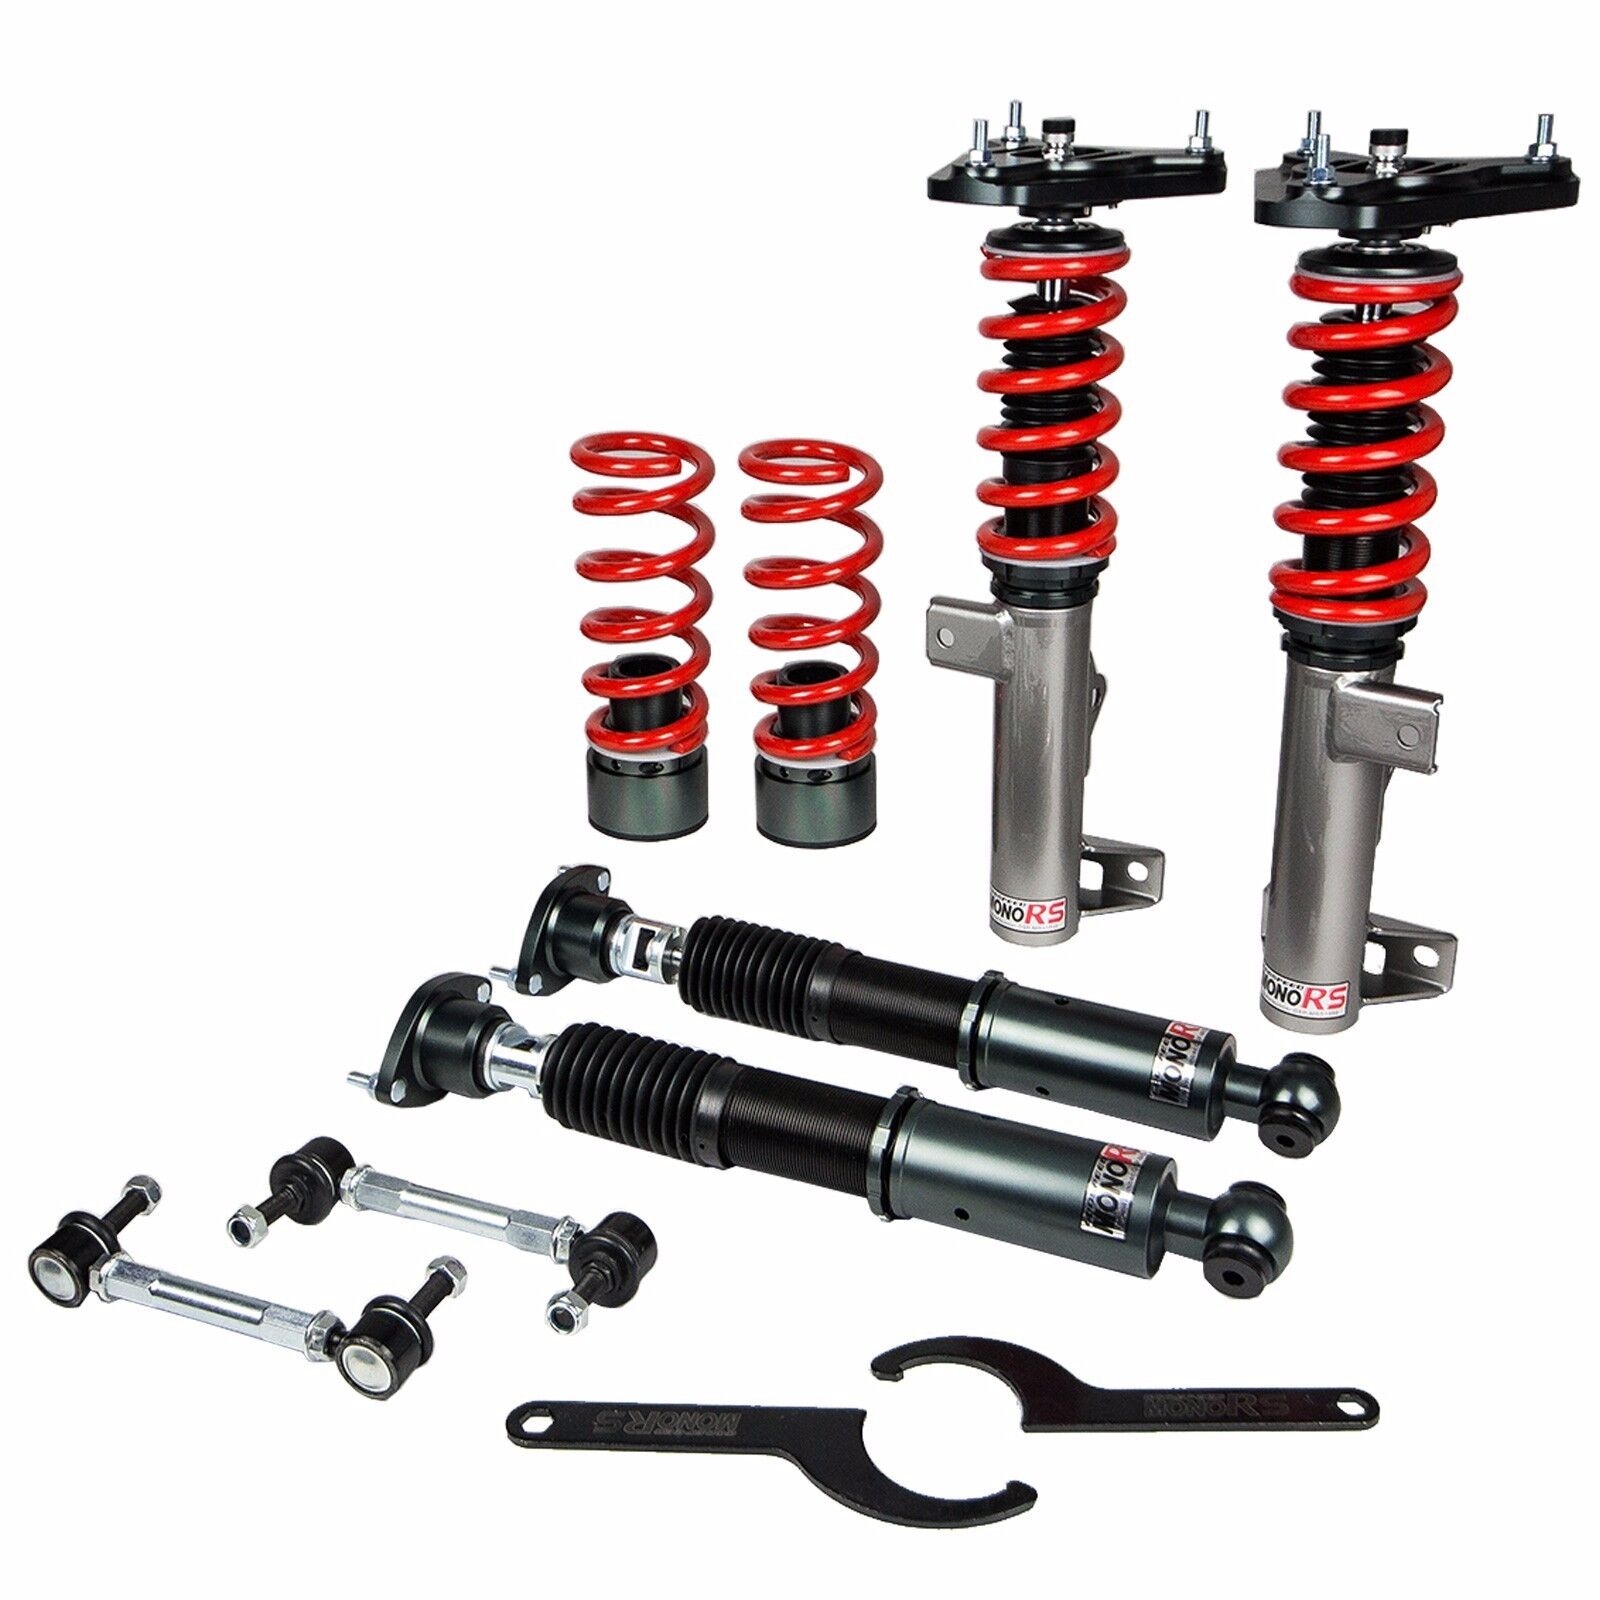 FOR MERCEDES E63 AMG 10-15 GODSPEED MONORS DAMPER COILOVERS SUSPENSION CAMBER